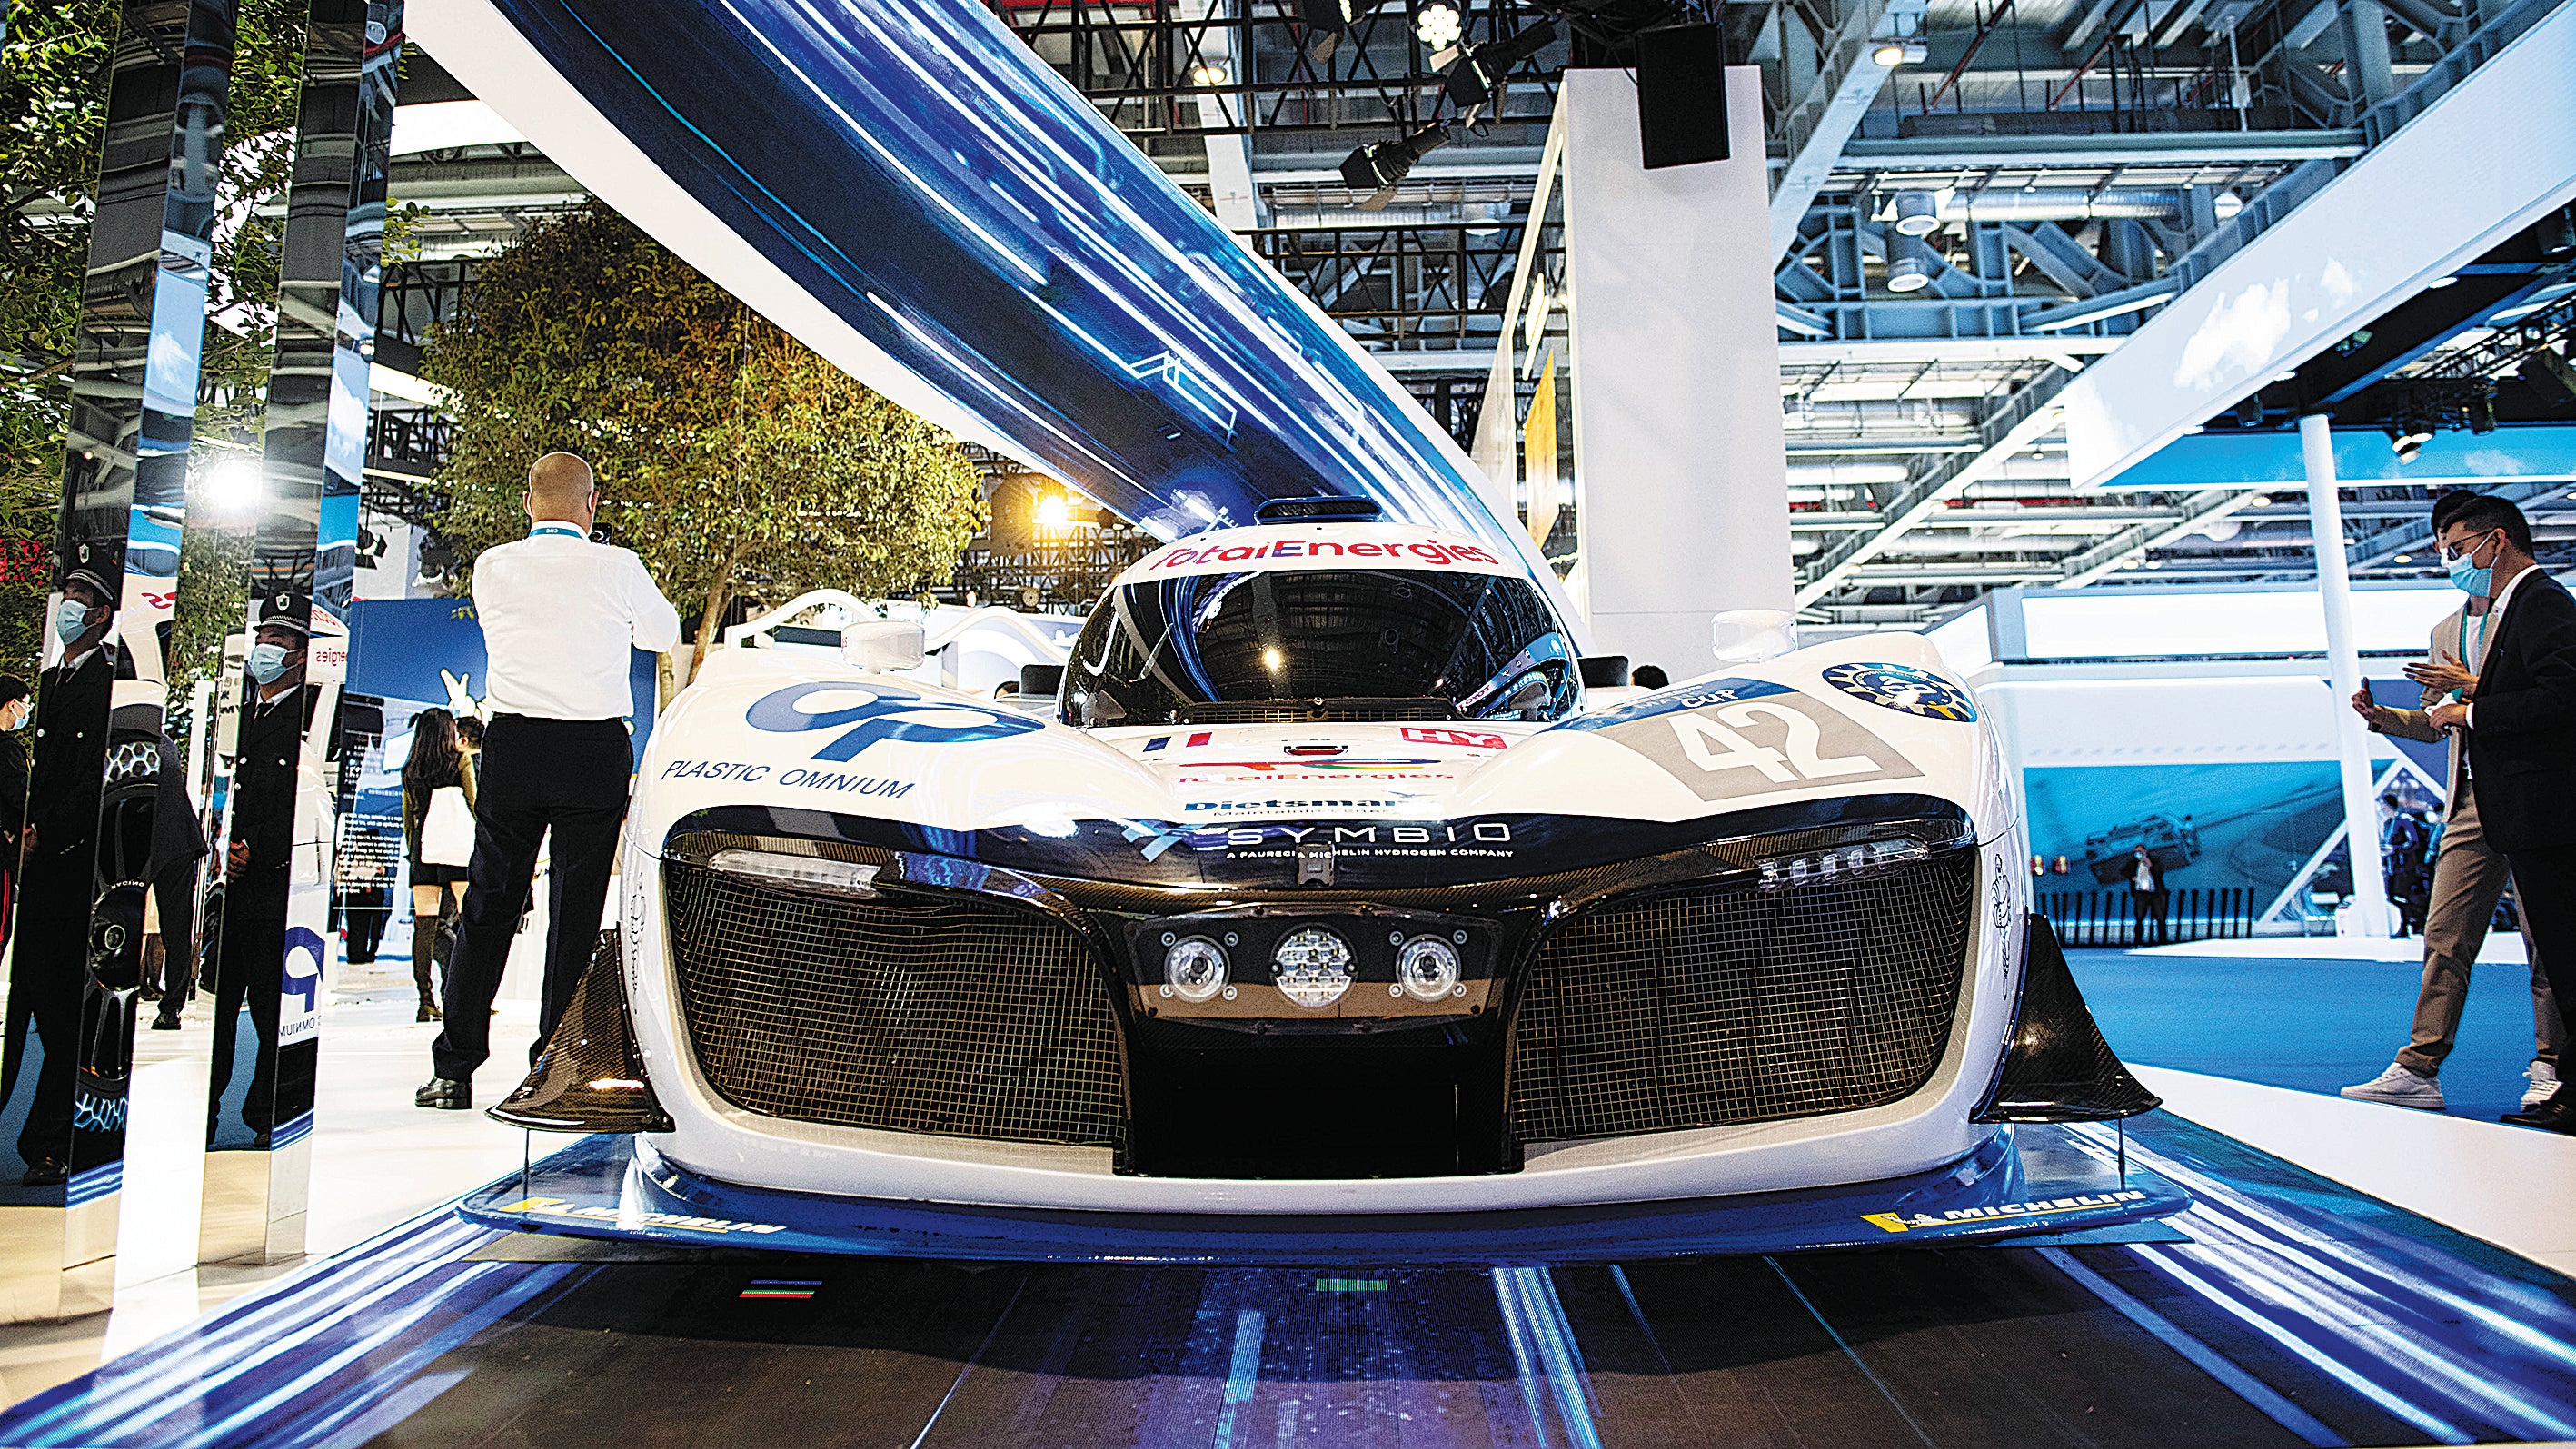 A hydrogen-powered race car is displayed during the fourth China International Import Expo in Shanghai in November 2021